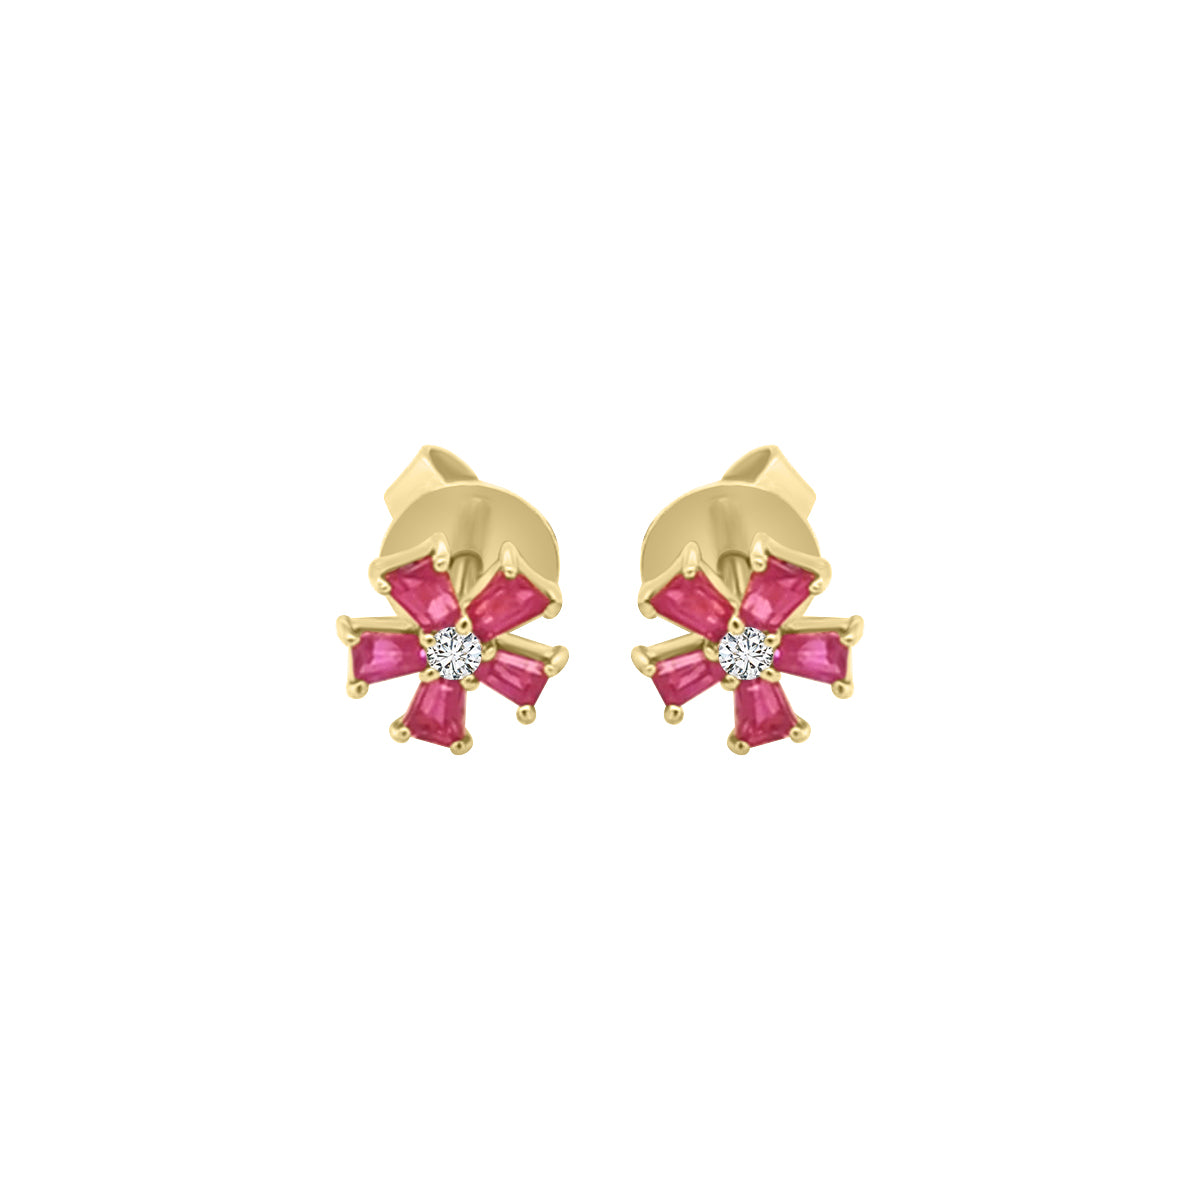 Flower Design Ruby And Diamond Earrings In 18k Yellow Gold.